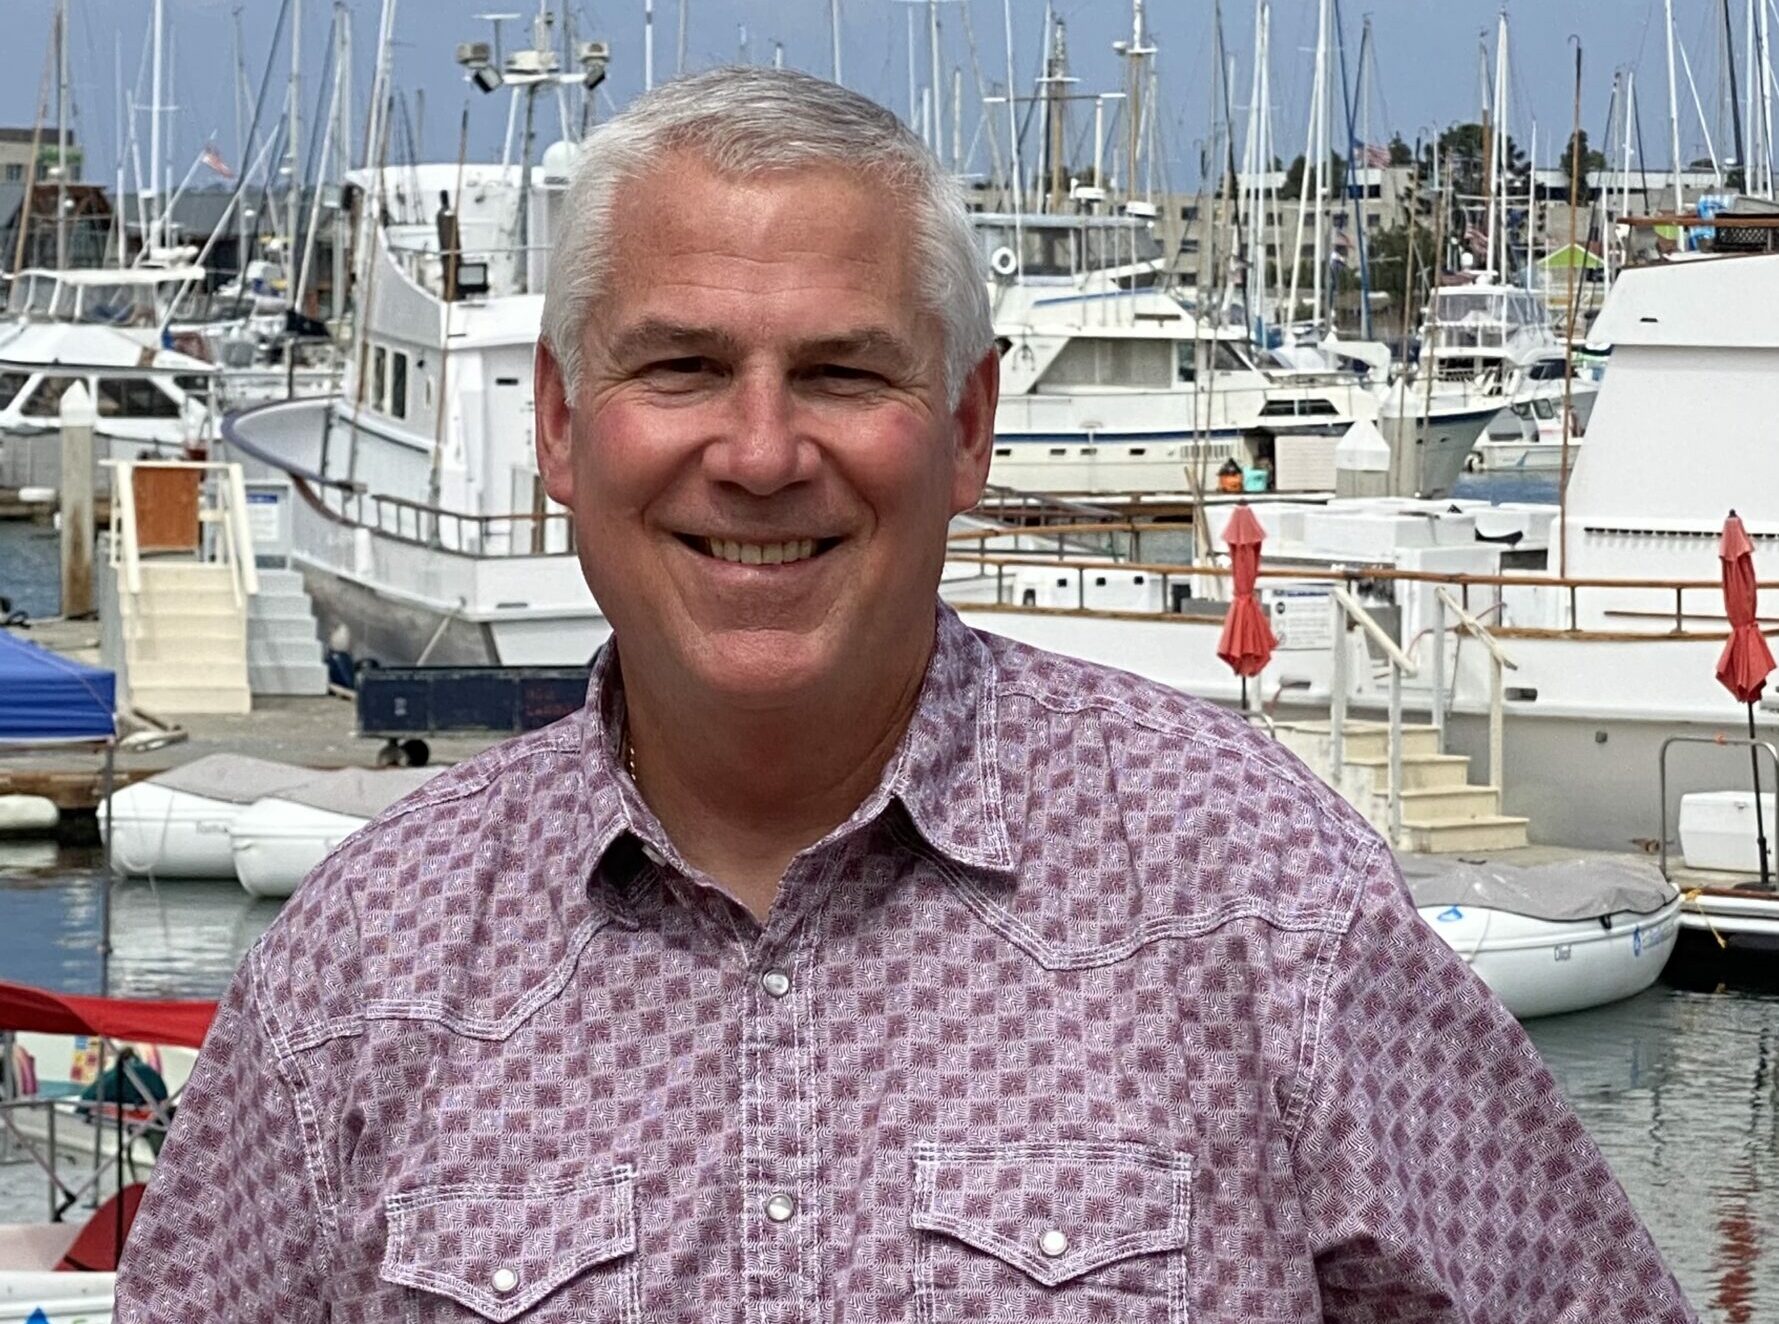 Cary Attl in a purple western style shirt leans against white railing in front of yachts.